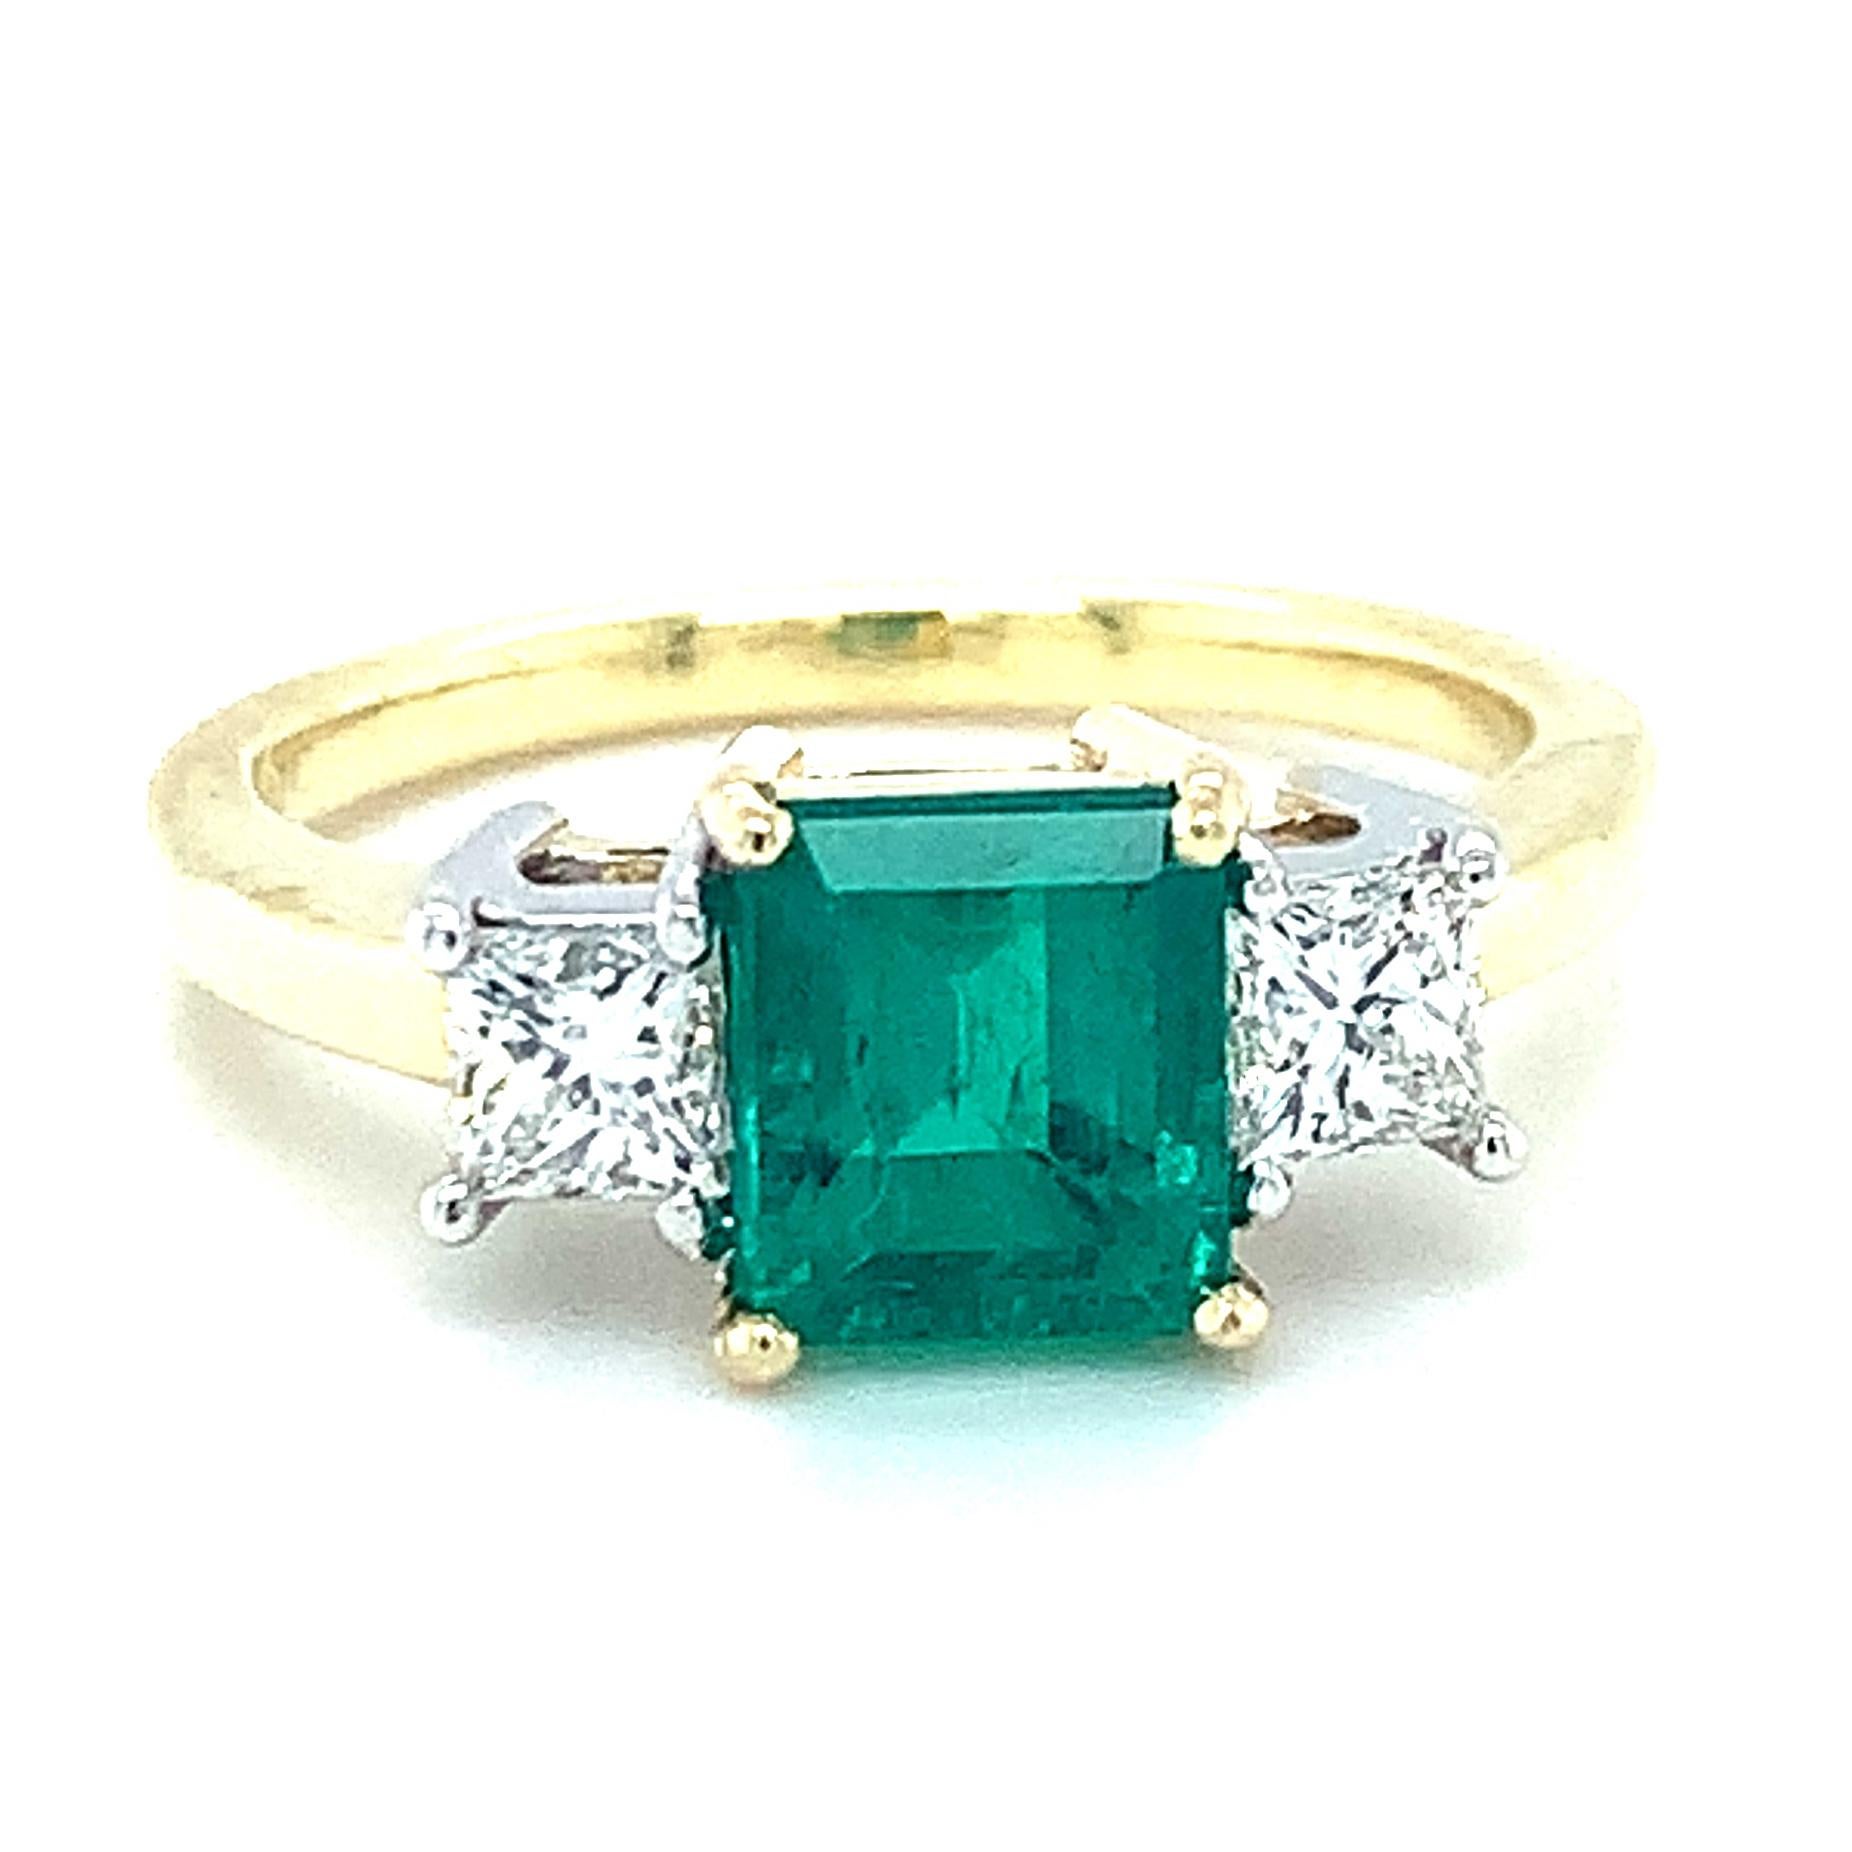 Worthy of envy! This classic 3-stone ring features a gorgeous green emerald that possesses beautiful color and brilliance. The center emerald is set in 18k yellow gold, flanked by fine quality, princess cut diamonds set in 18k white gold. This